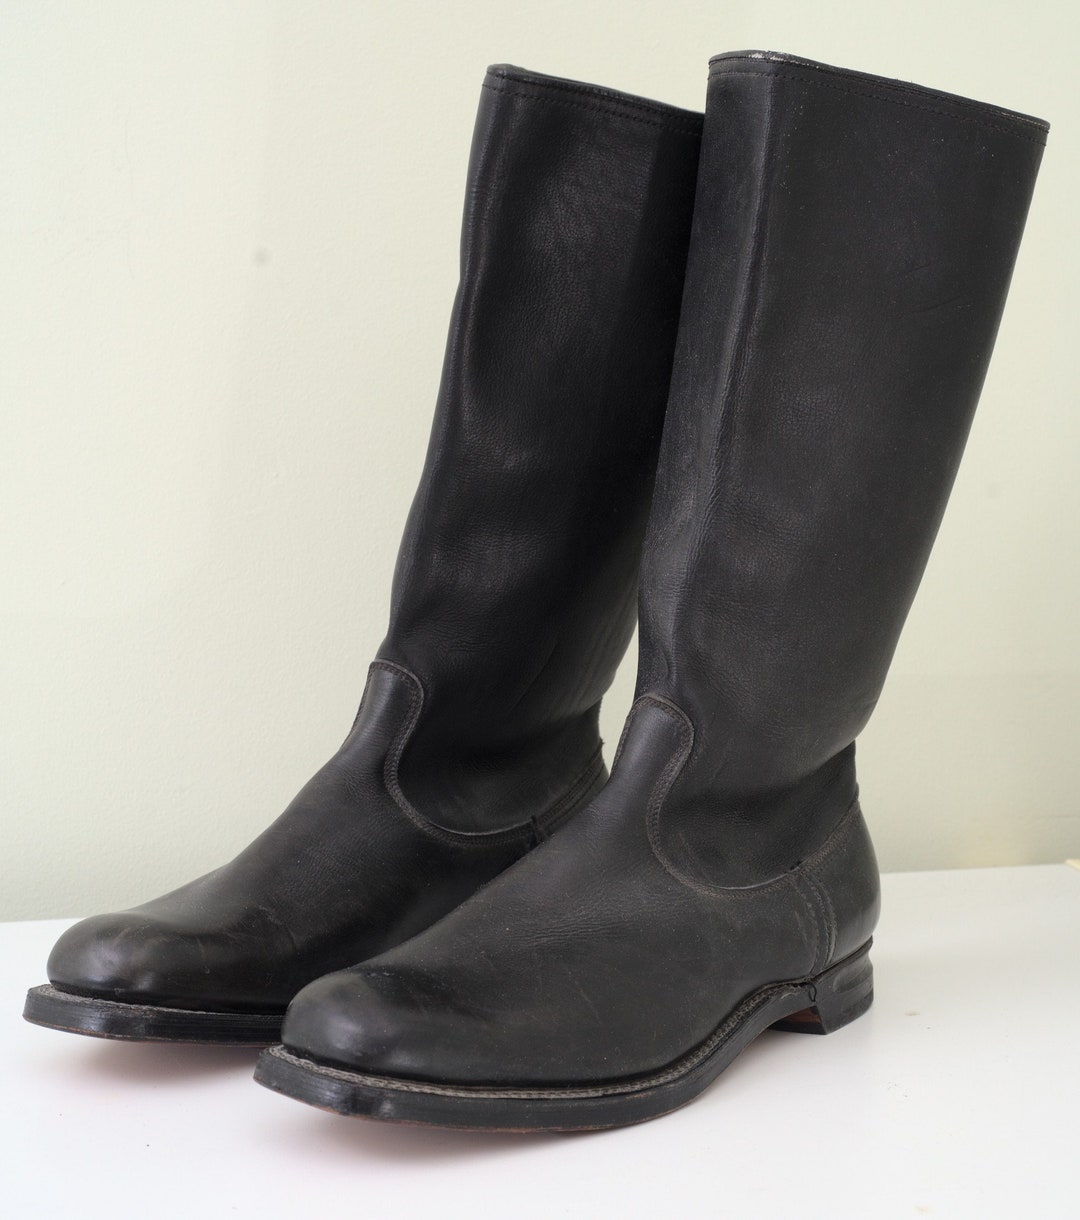 NOS Vintage Finnish Army Full Grain Leather Boots Size 50 EUR / US 16 ...